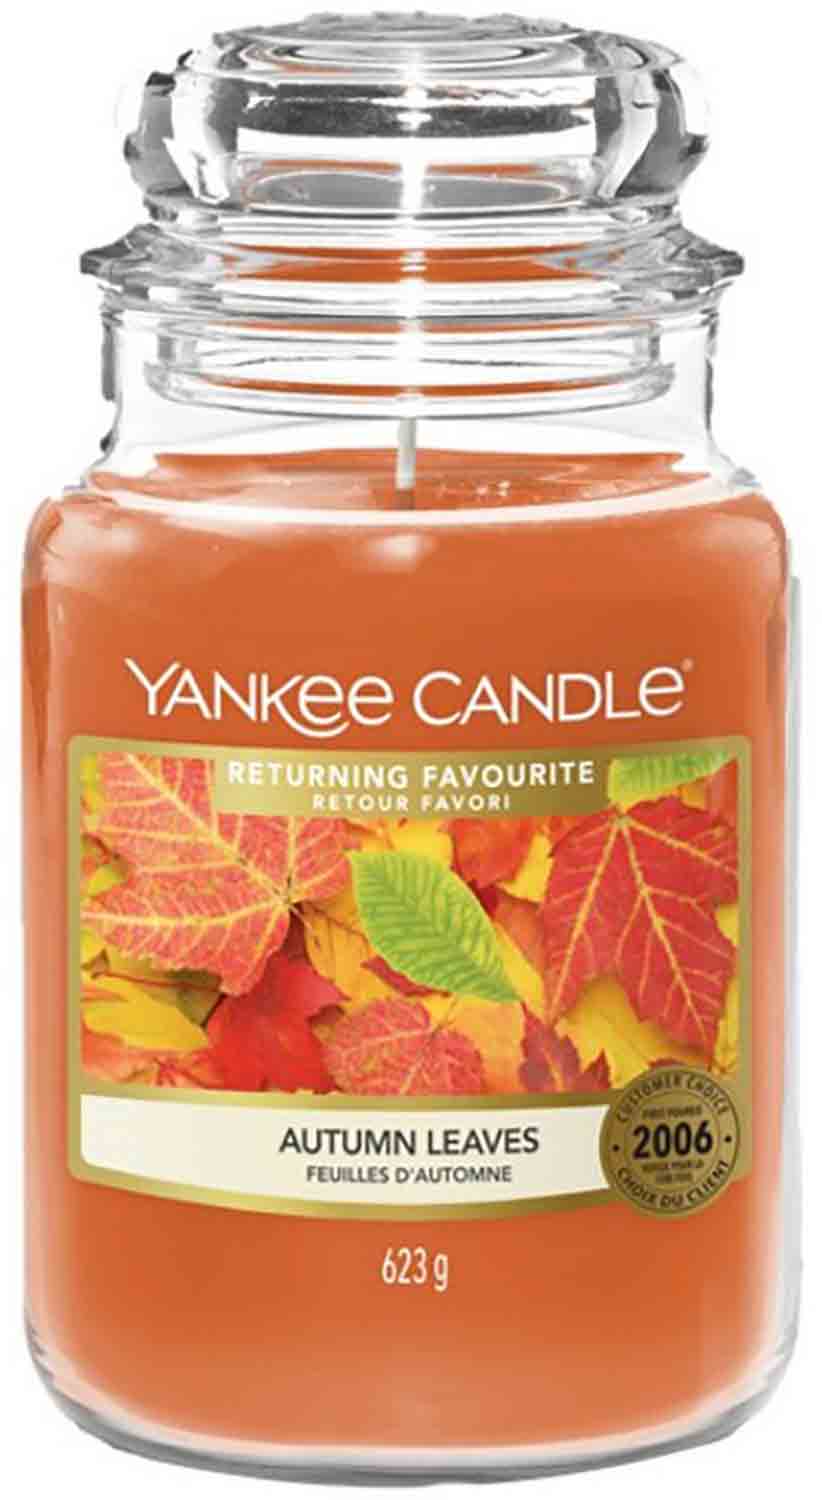 Yankee Candle Autumn Leaves 623g